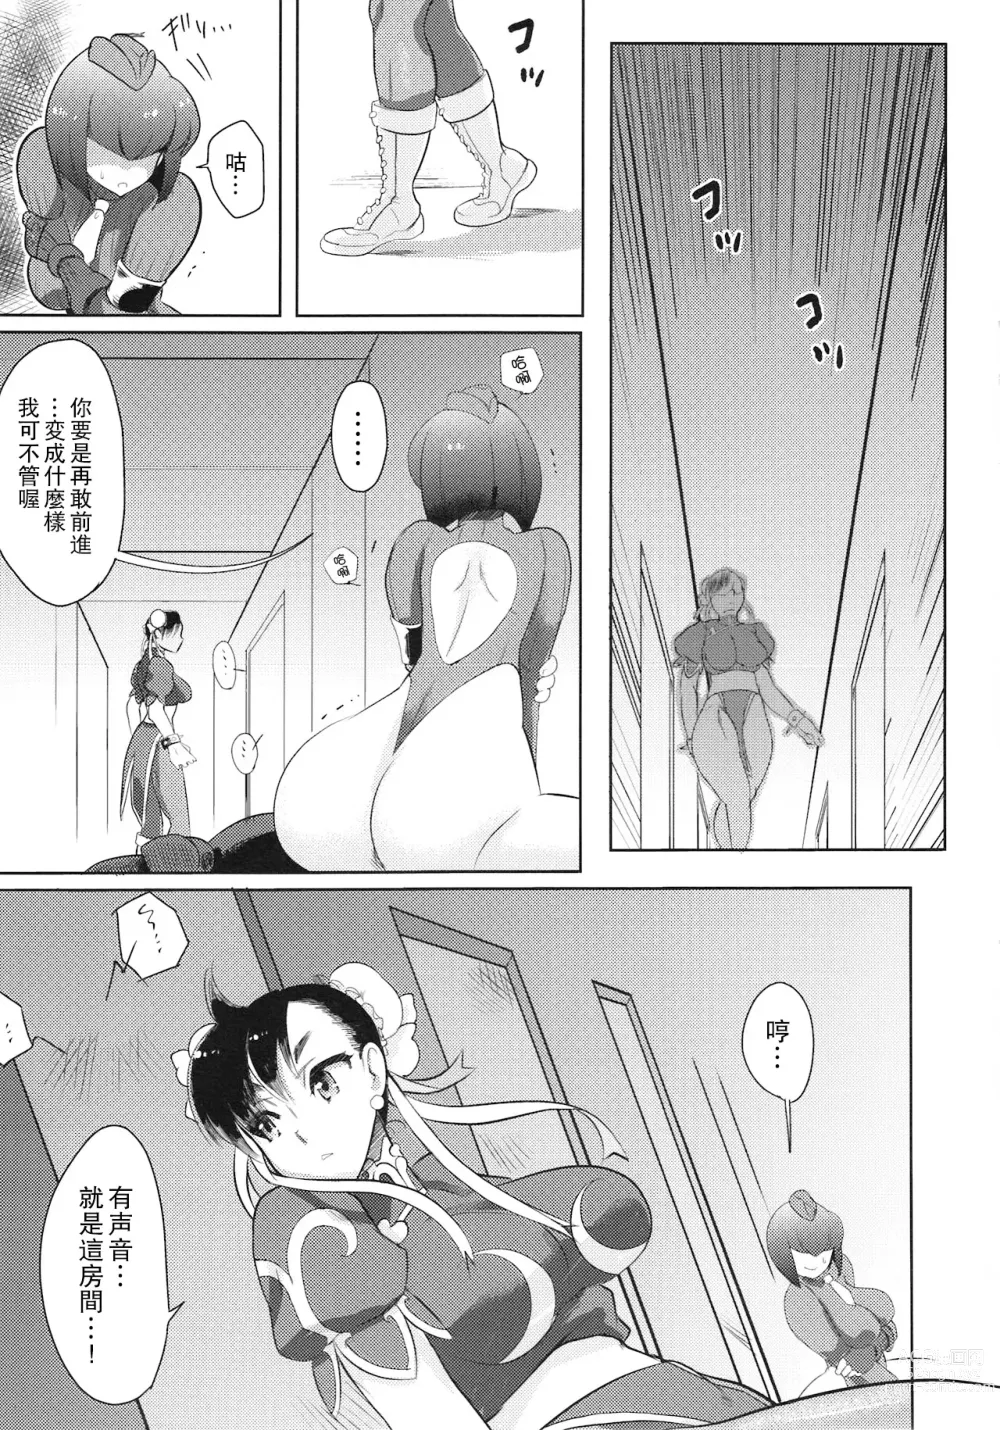 Page 4 of doujinshi 扶她行動